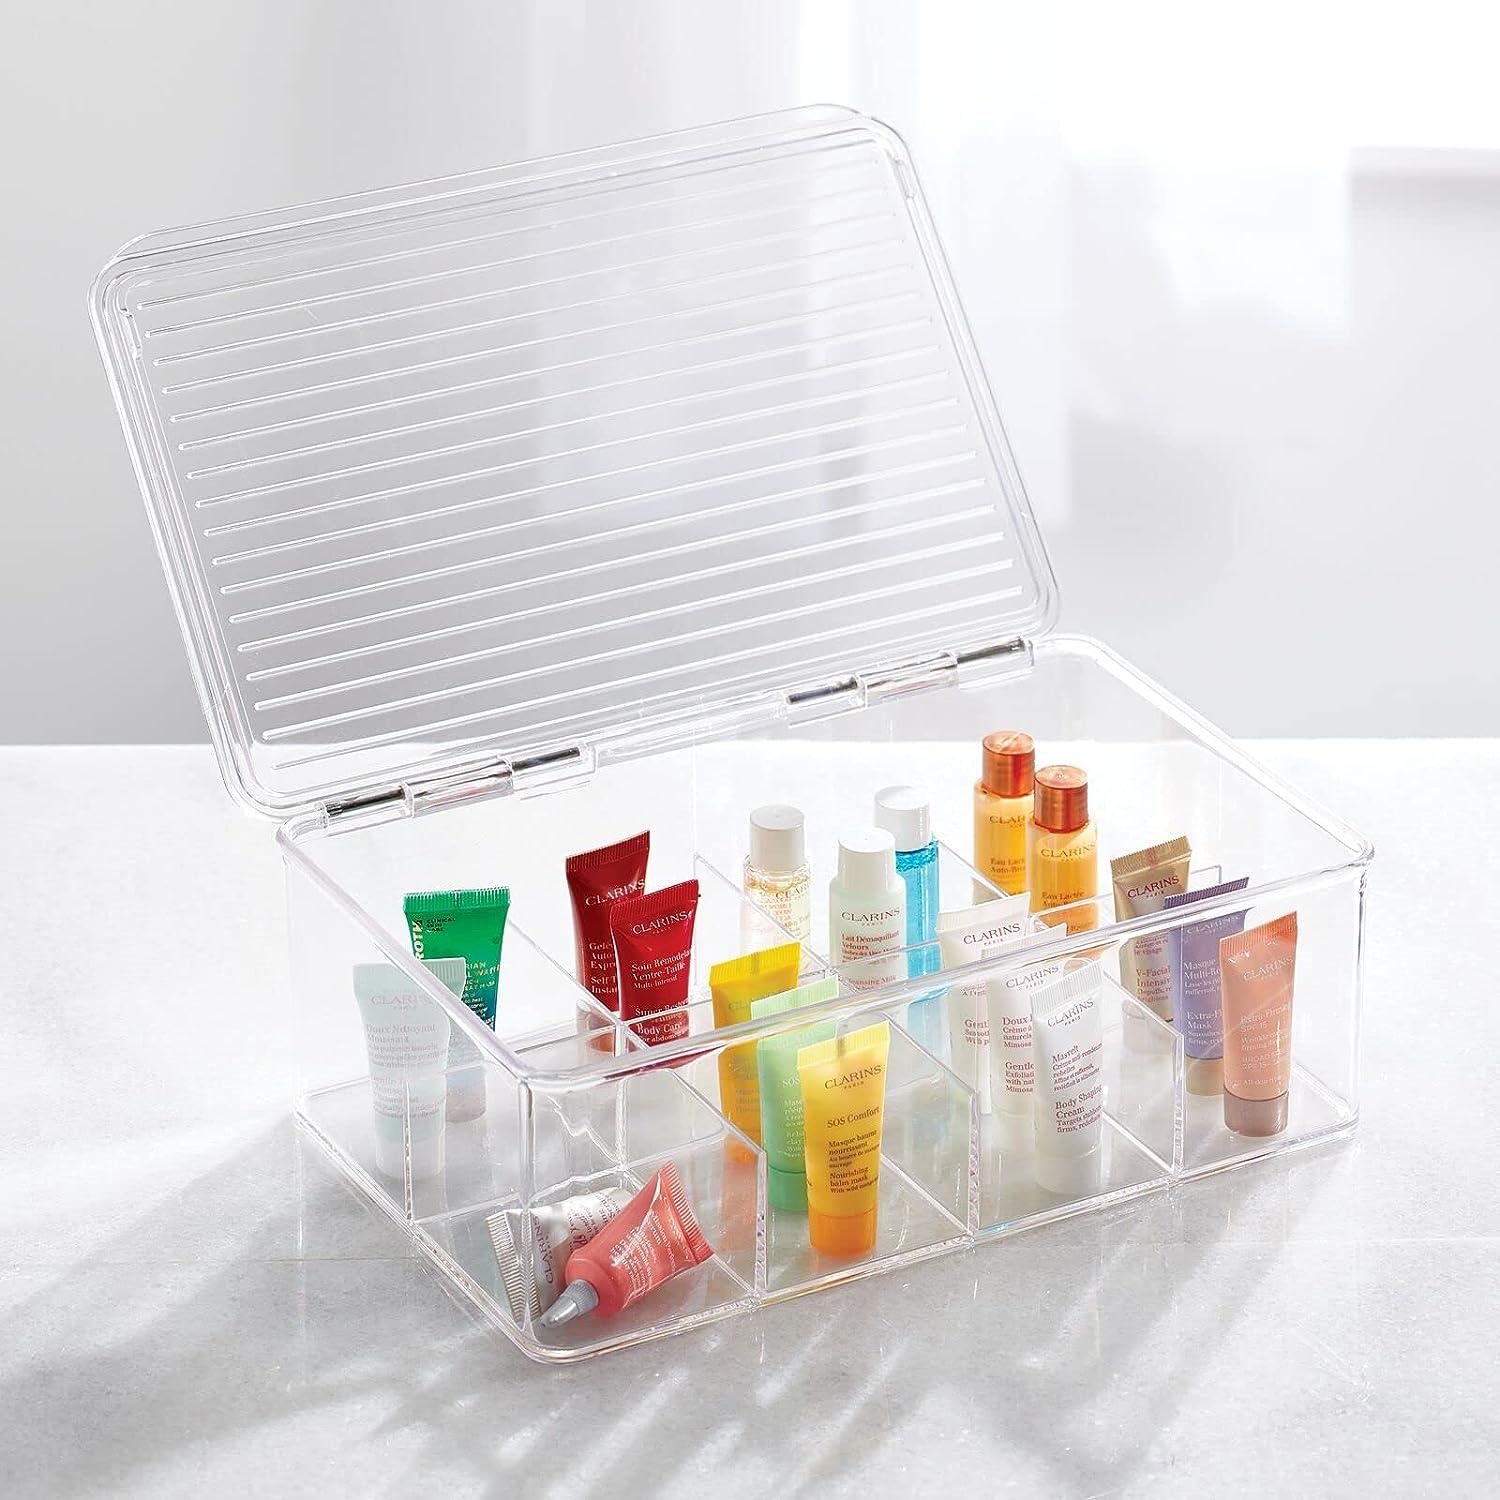 mDesign Plastic Stackable Kitchen Food Storage Box, Hinged Lid, 8 Pack -  Clear